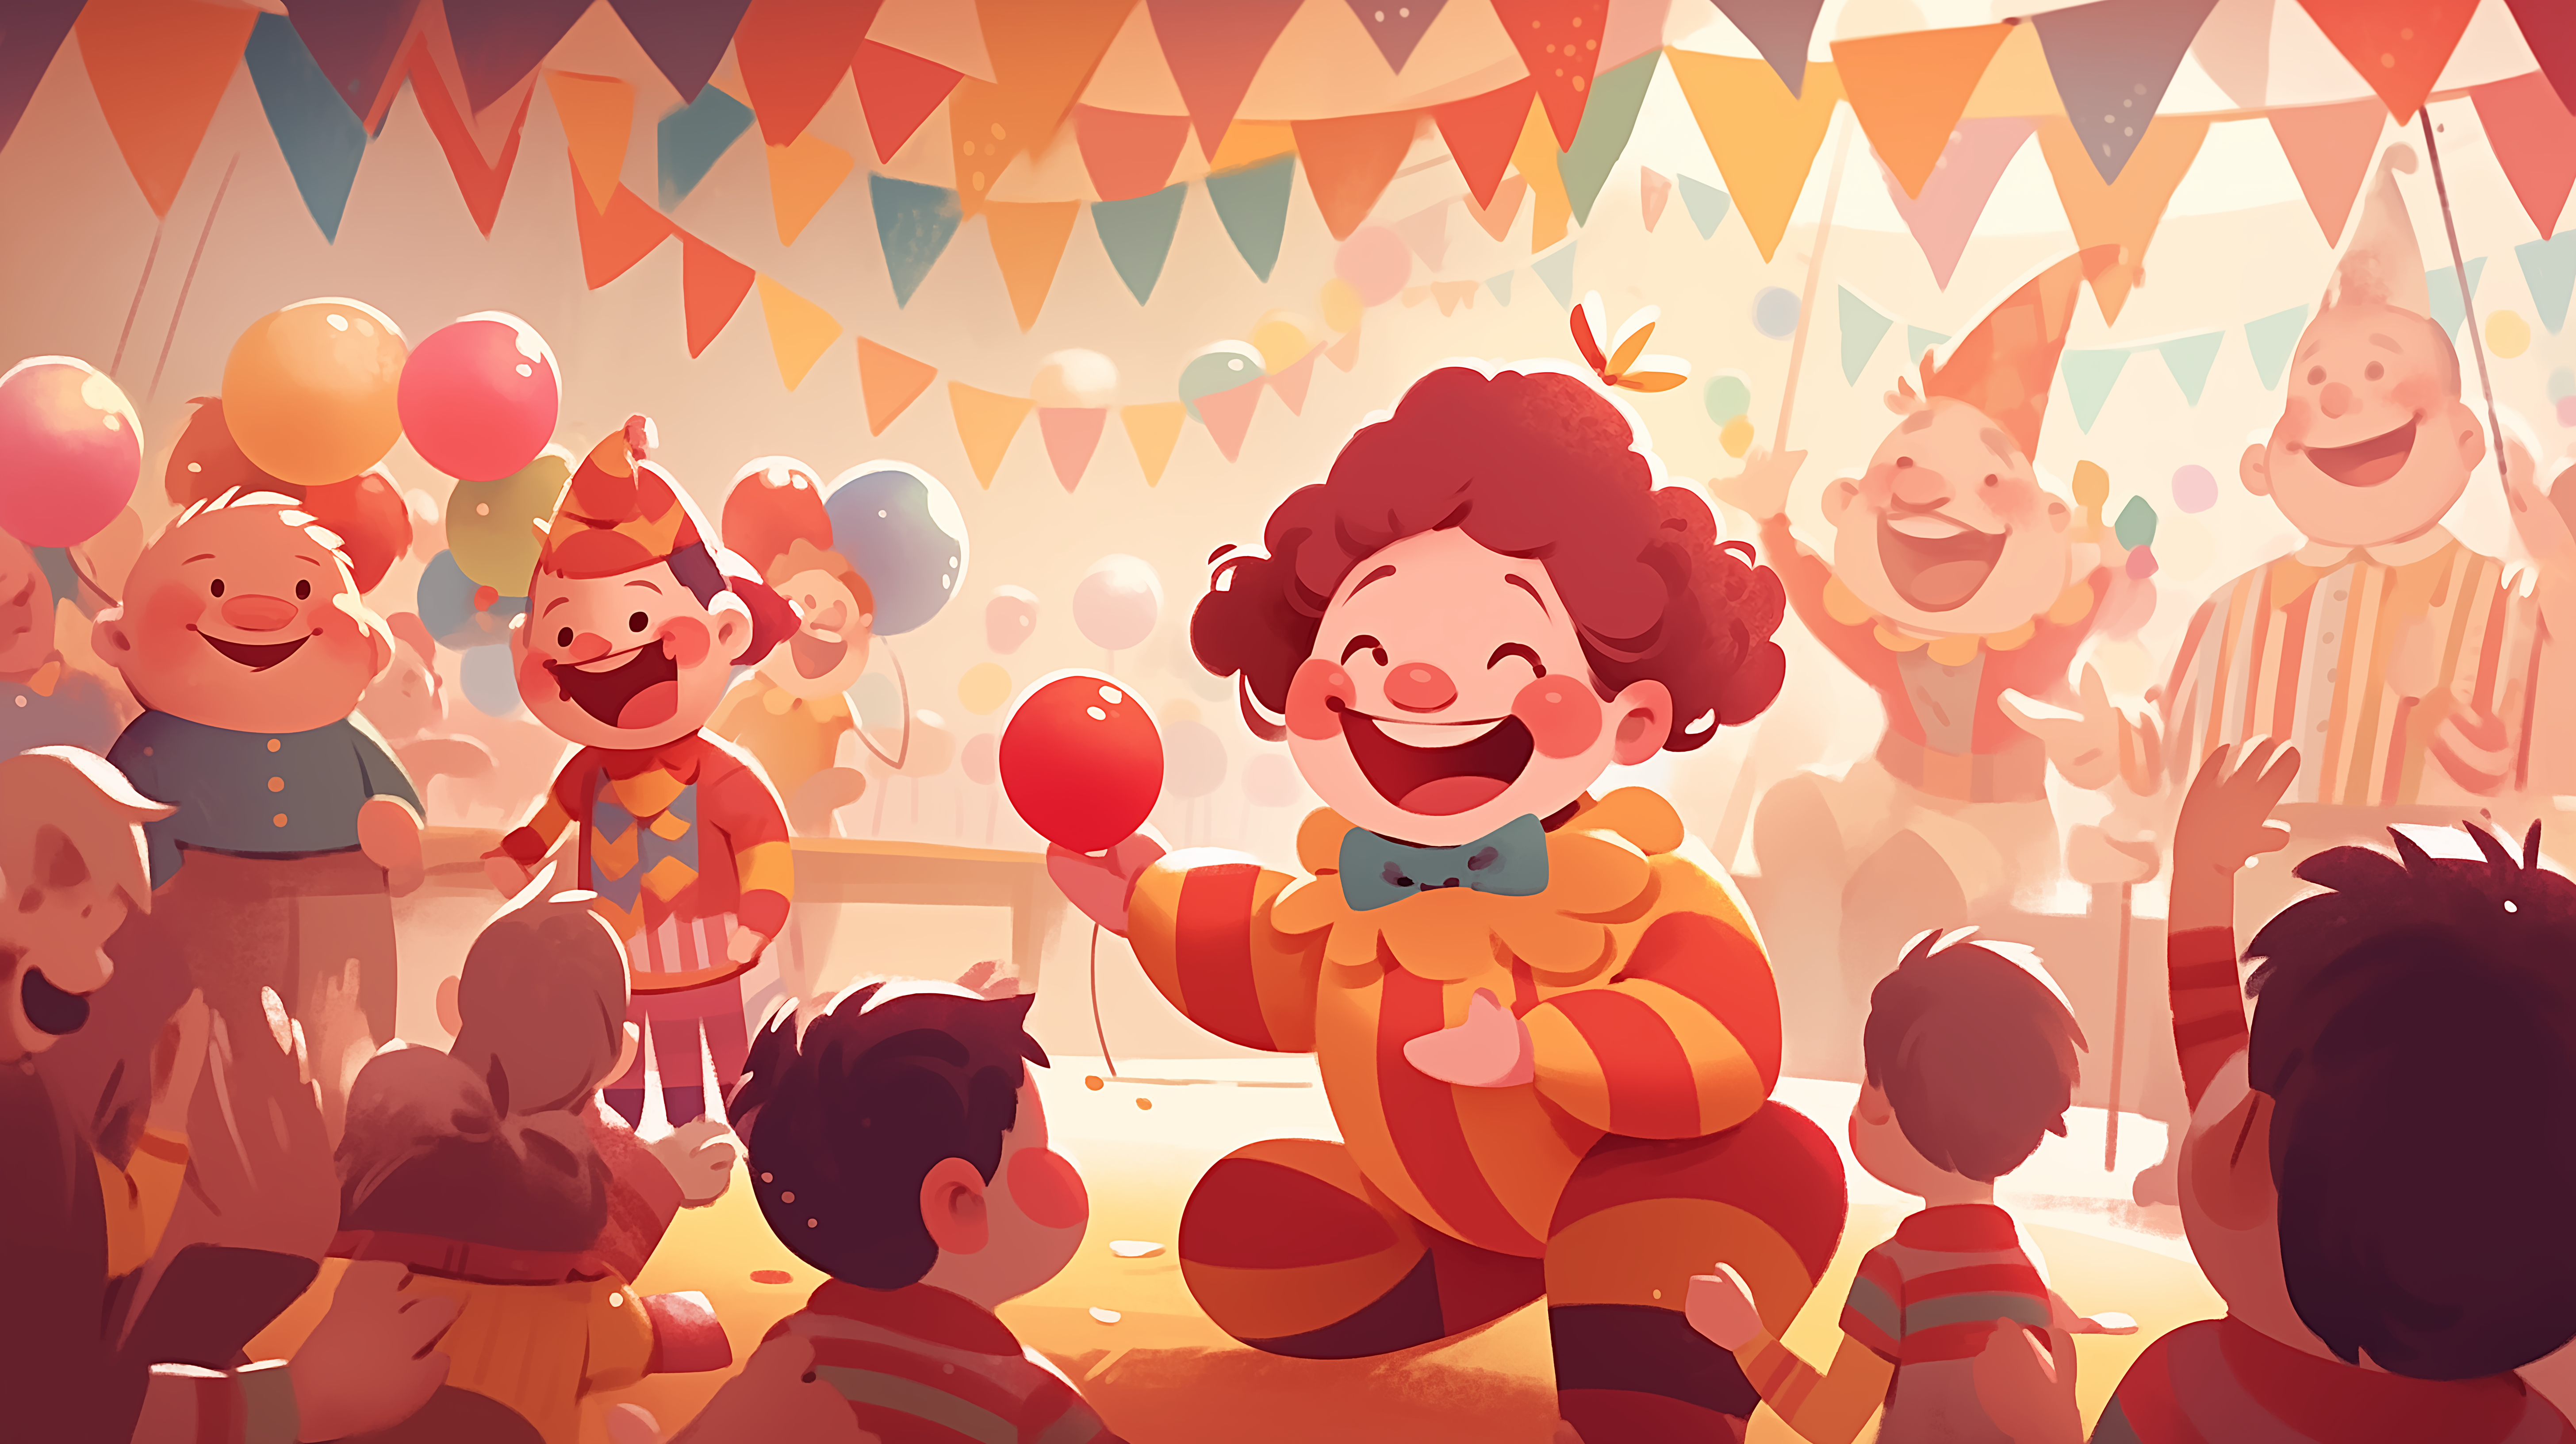 Colorful cartoon clown wallpaper with happy clowns and children at a festive party, perfect for HD desktop backgrounds.